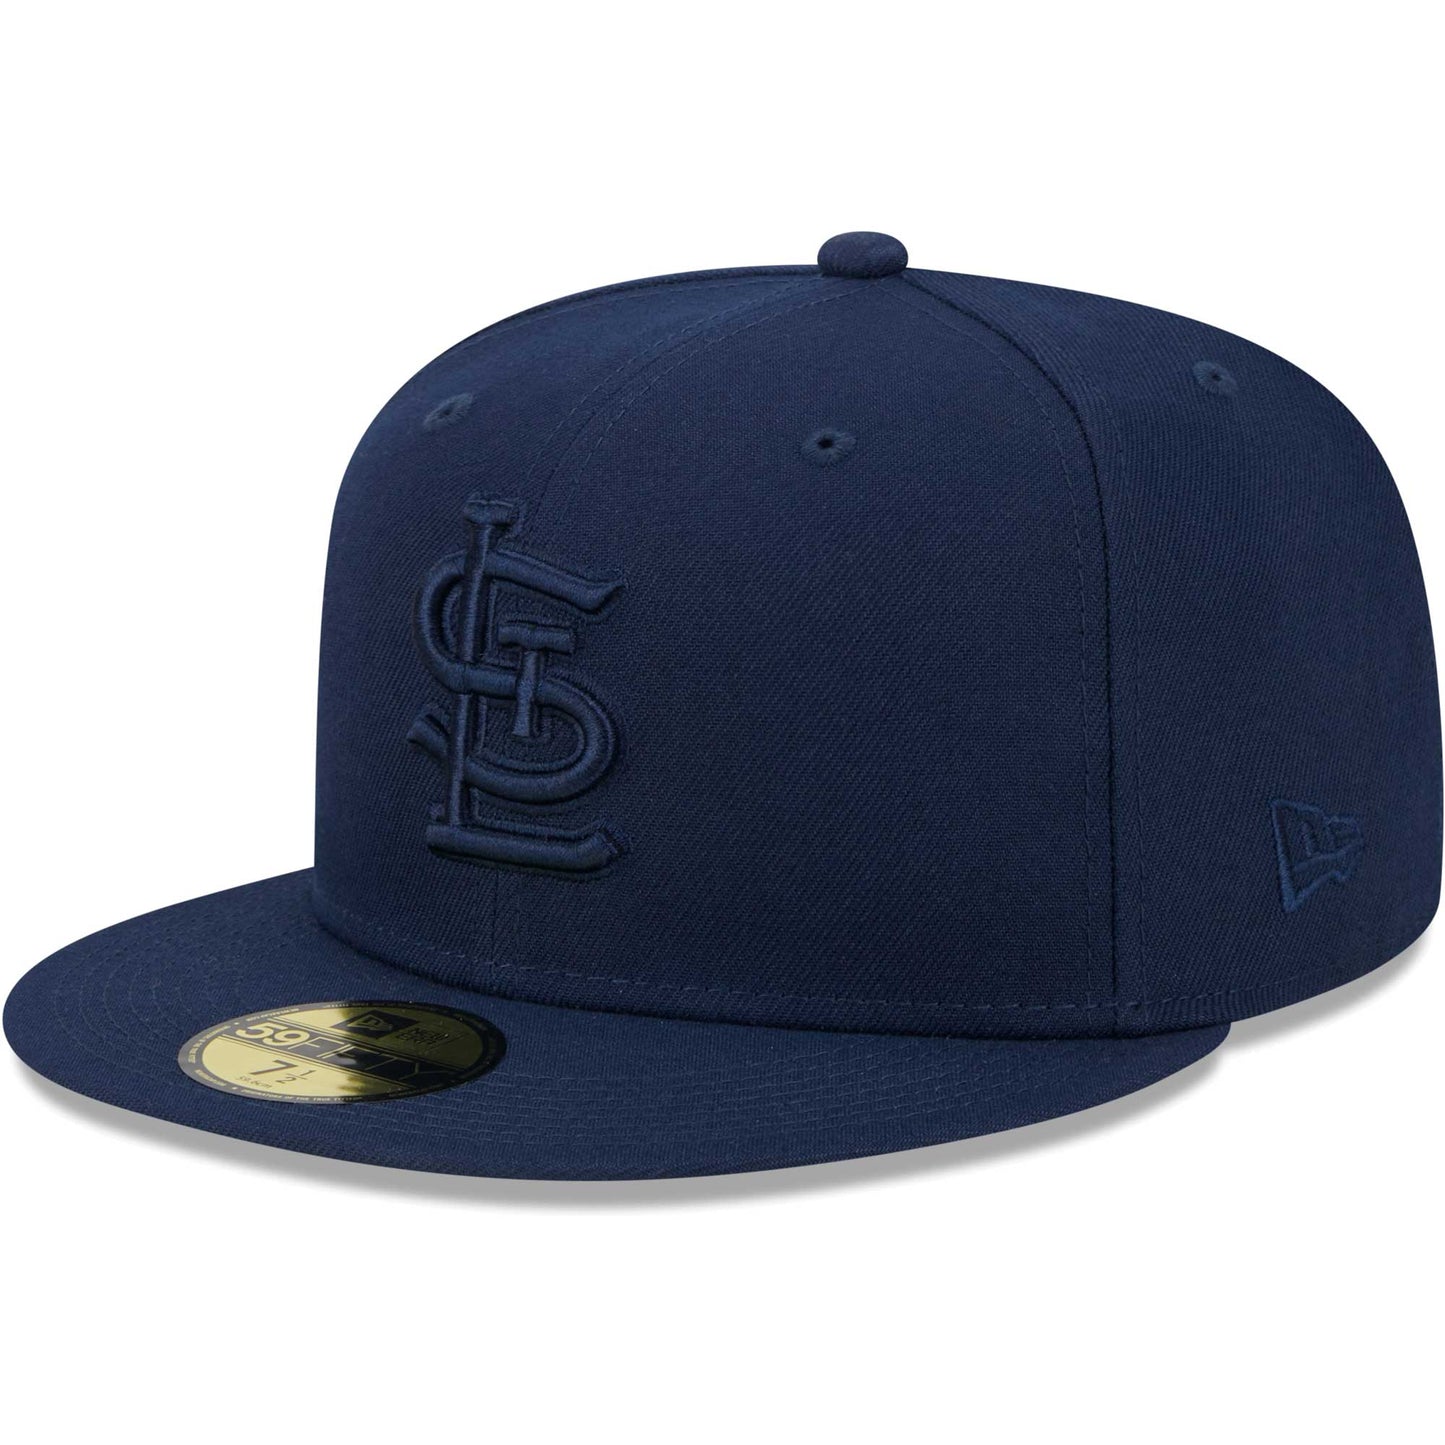 St. Louis Cardinals New Era Color Pack 59FIFTY Fitted Hat - Navy